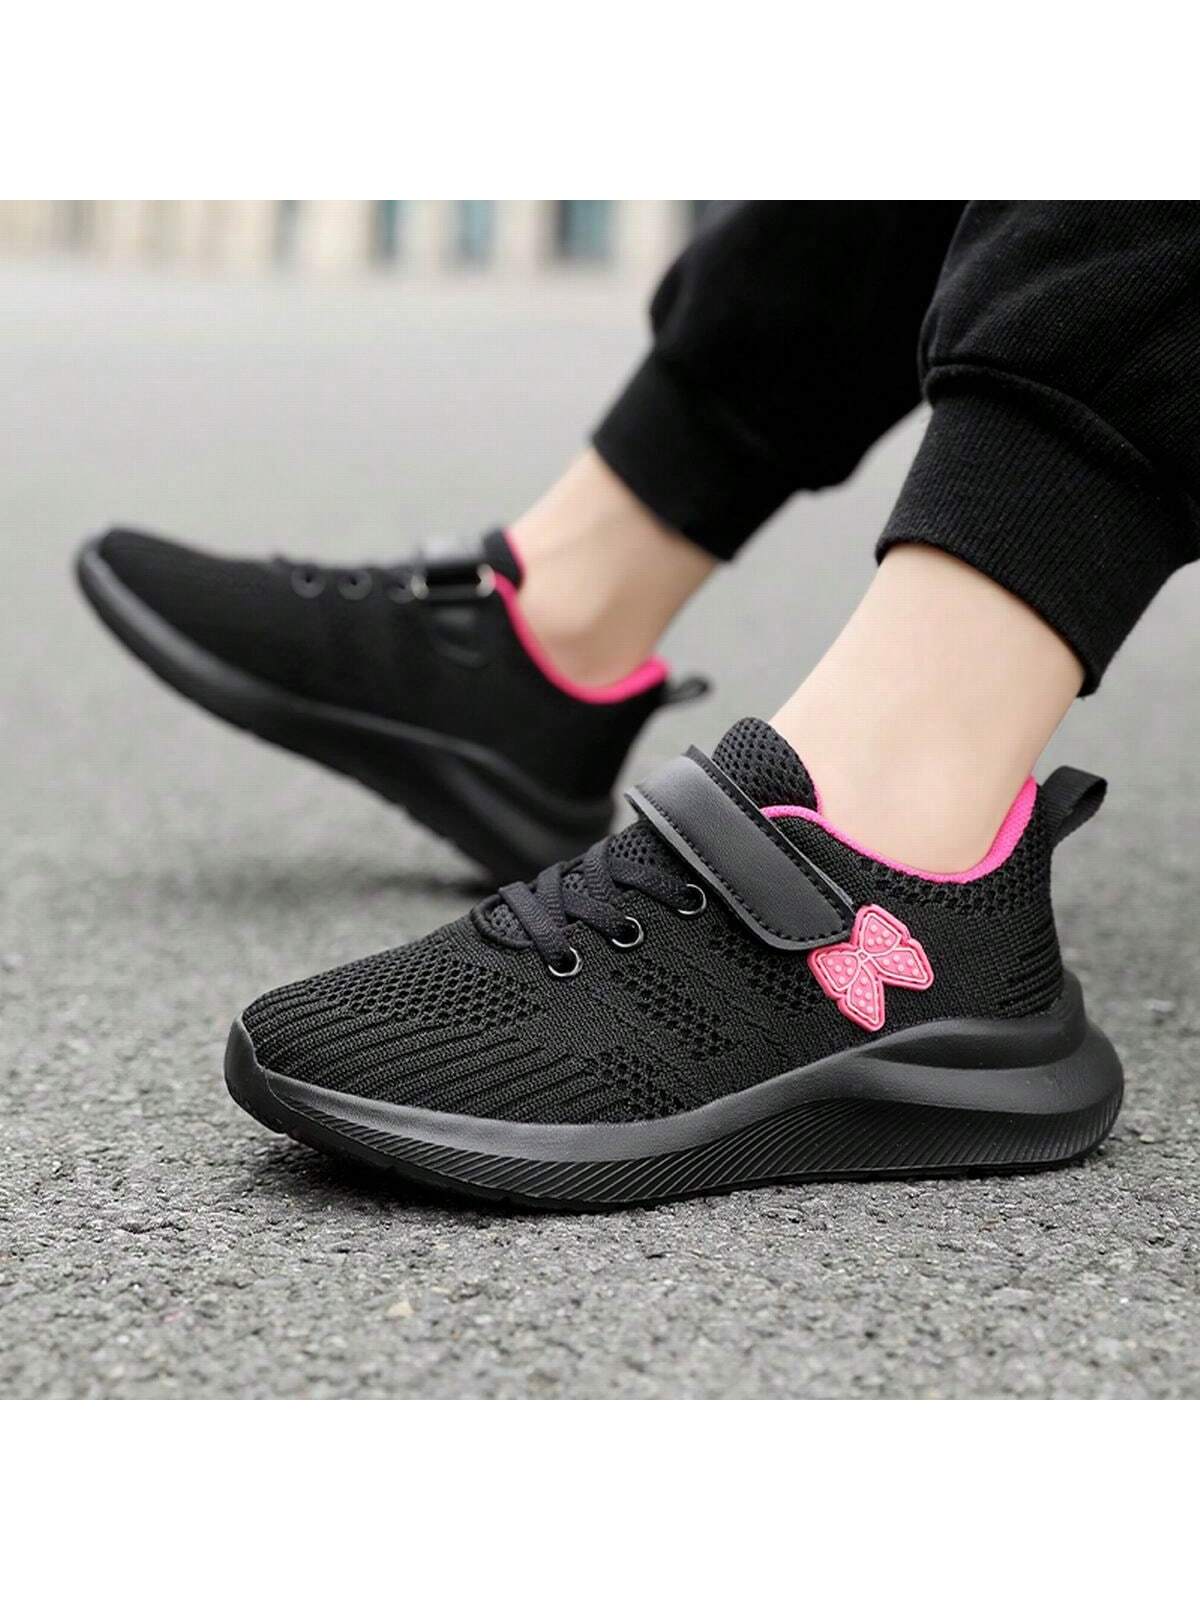 1 Pair Lightweight & Comfortable Women'S Athletic Shoes, Casual Breathable Mesh Running Shoes, All-Match Summer Sneakers-Black-5